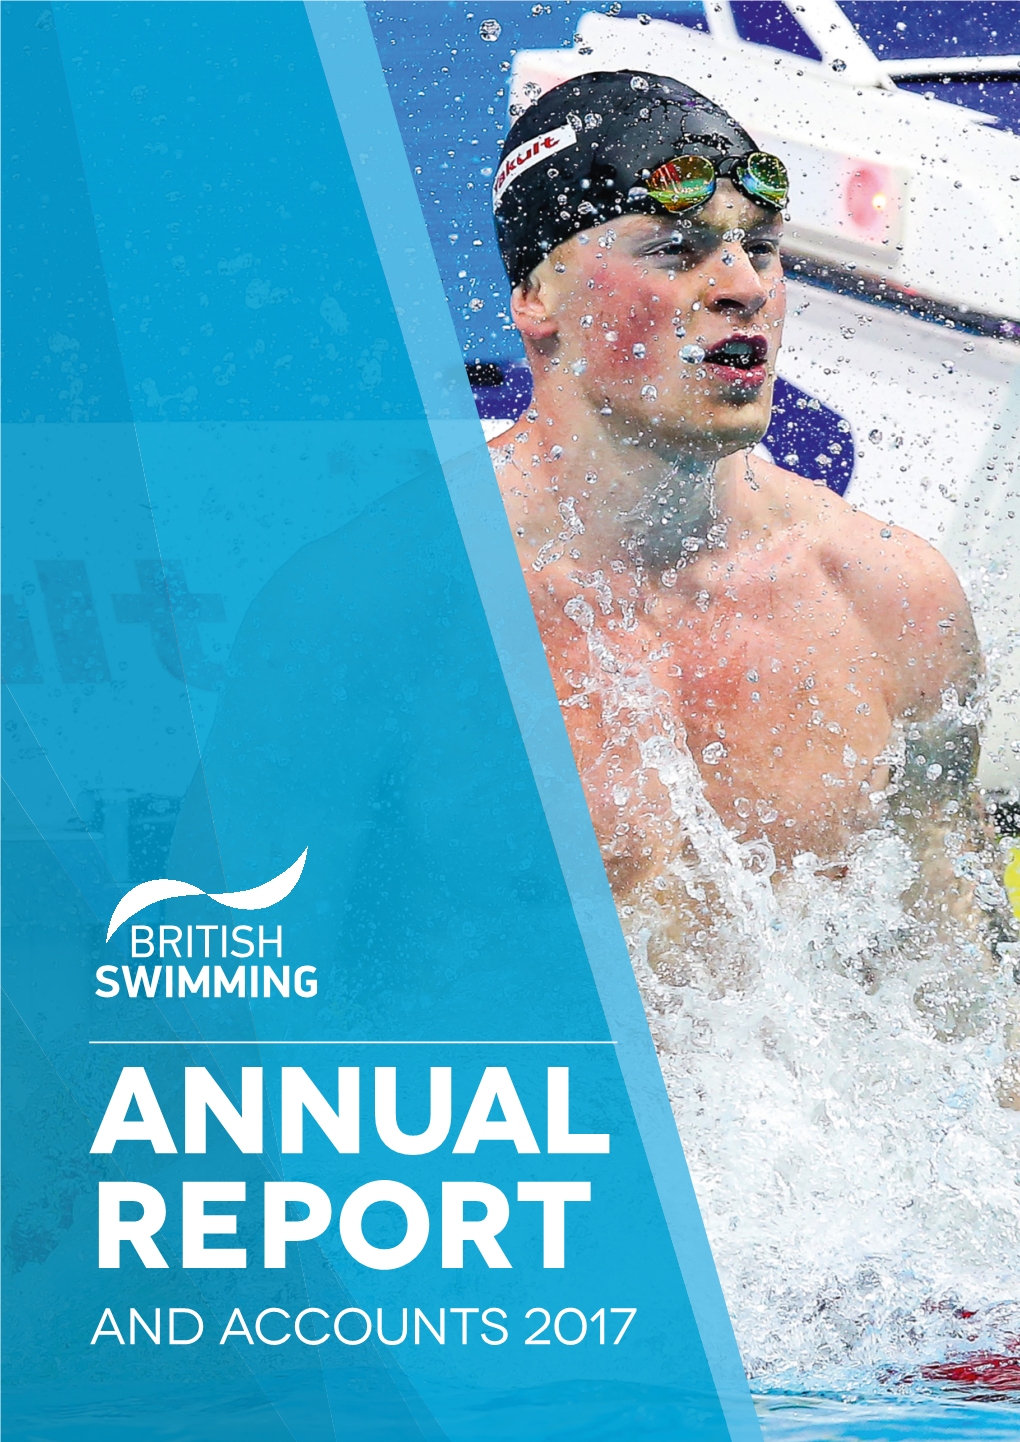 AND ACCOUNTS 2017 1 British Swimming Annual Report and Accounts 2017